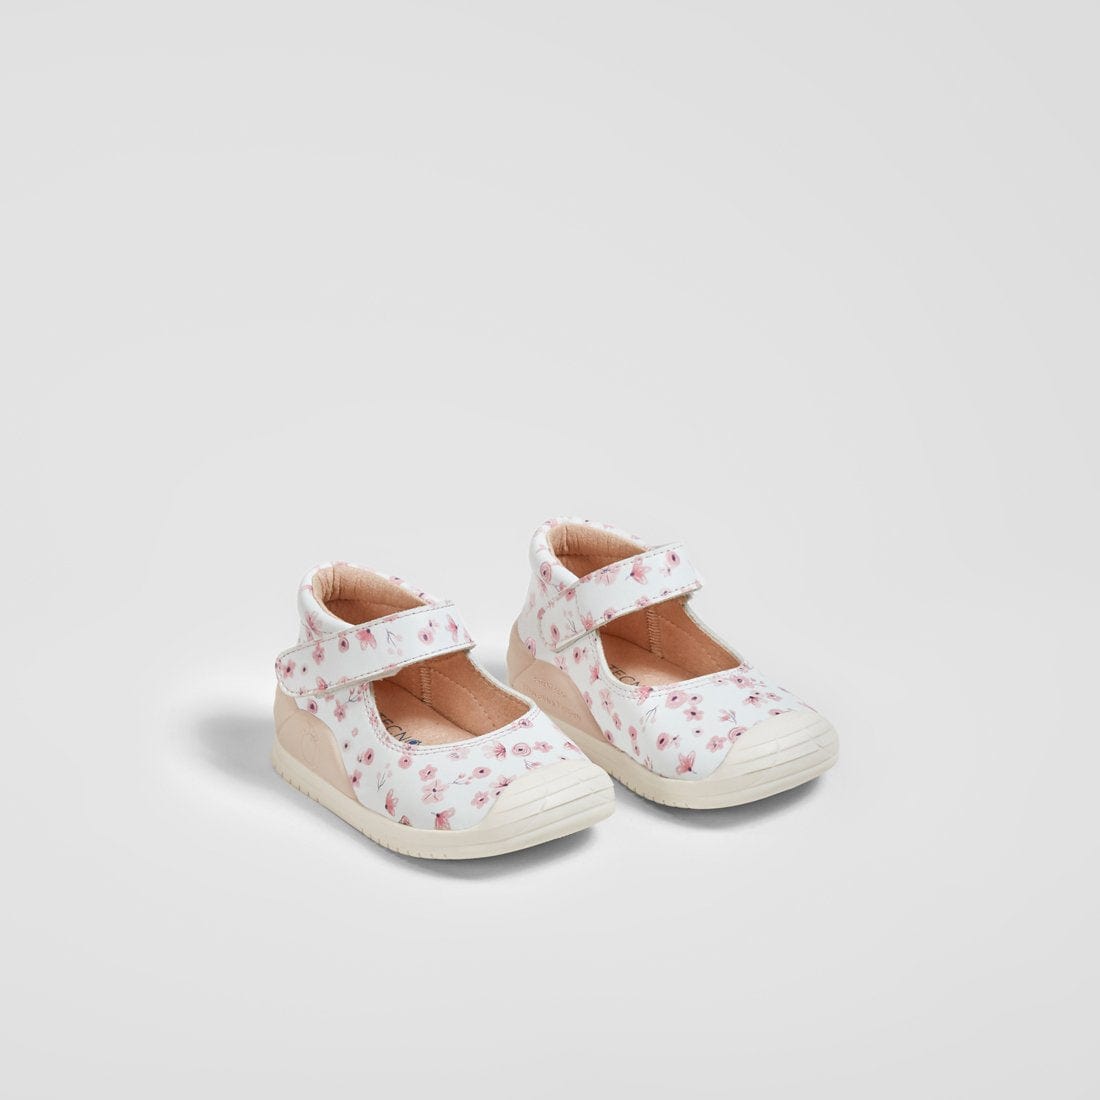 TECNOBABY Shoes Baby's Pink Flowers Print onMicro® Mary Janes